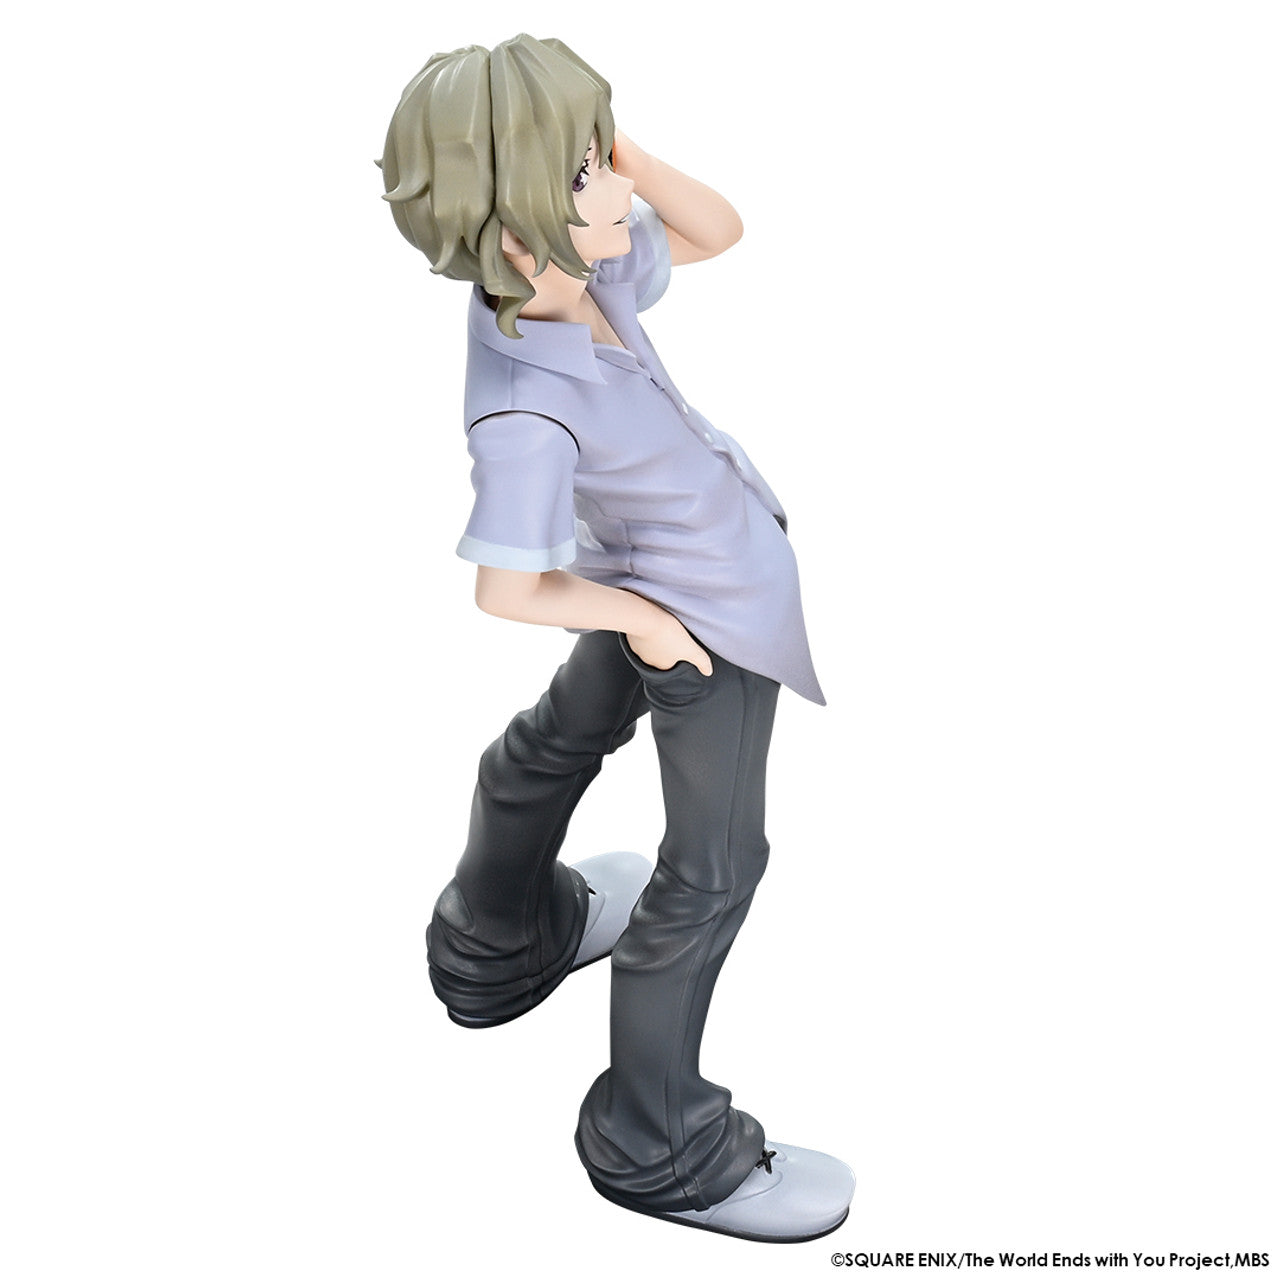 THE WORLD ENDS WITH YOU THE ANIMATION FIGURE - JOSHUA